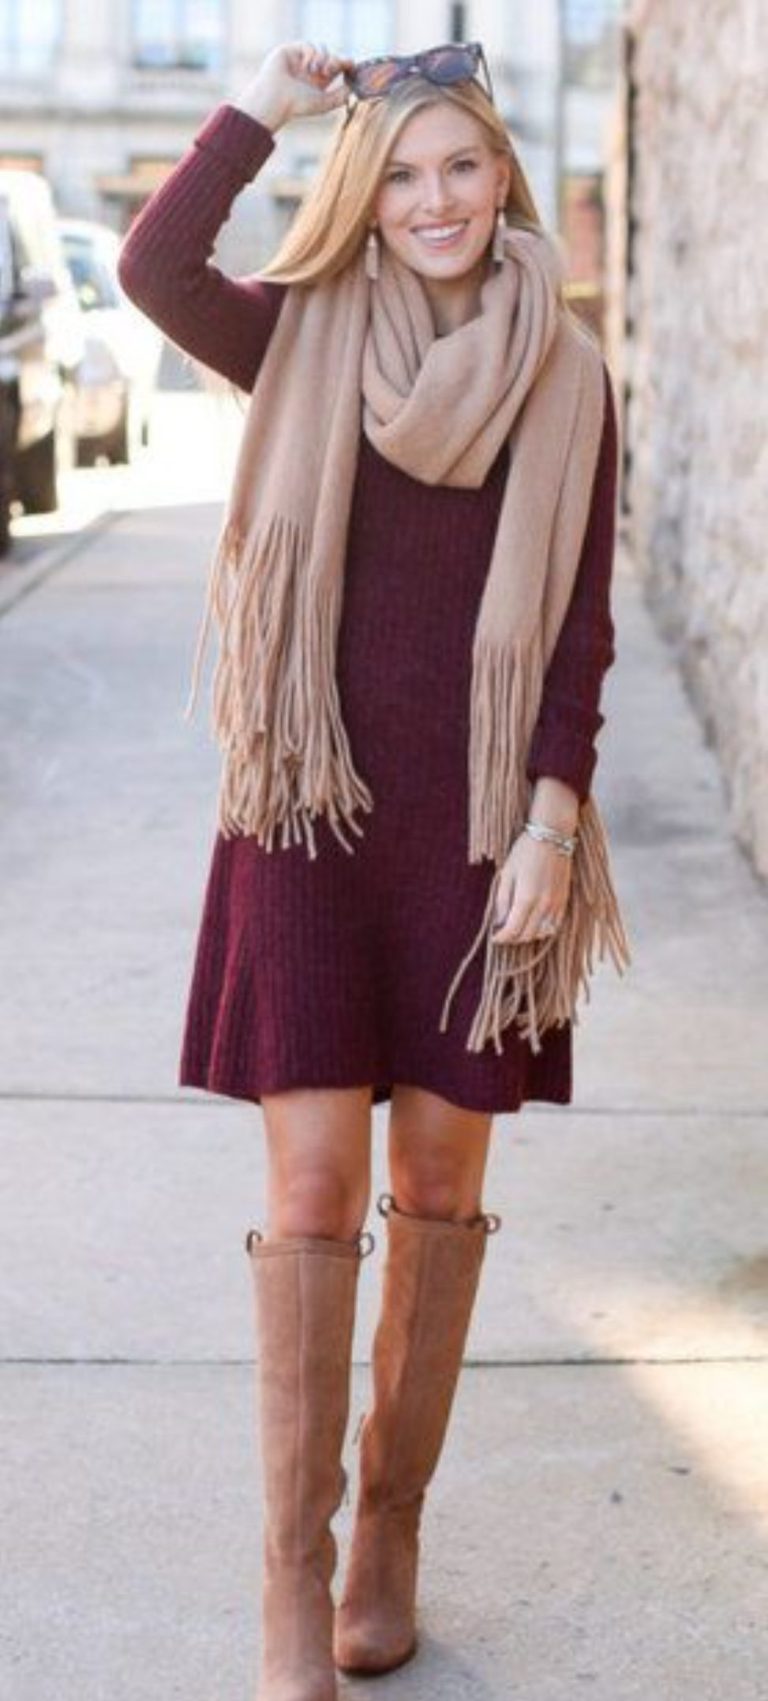 What Color Of Shoes To Wear With Your Burgundy Dress? - Hood MWR